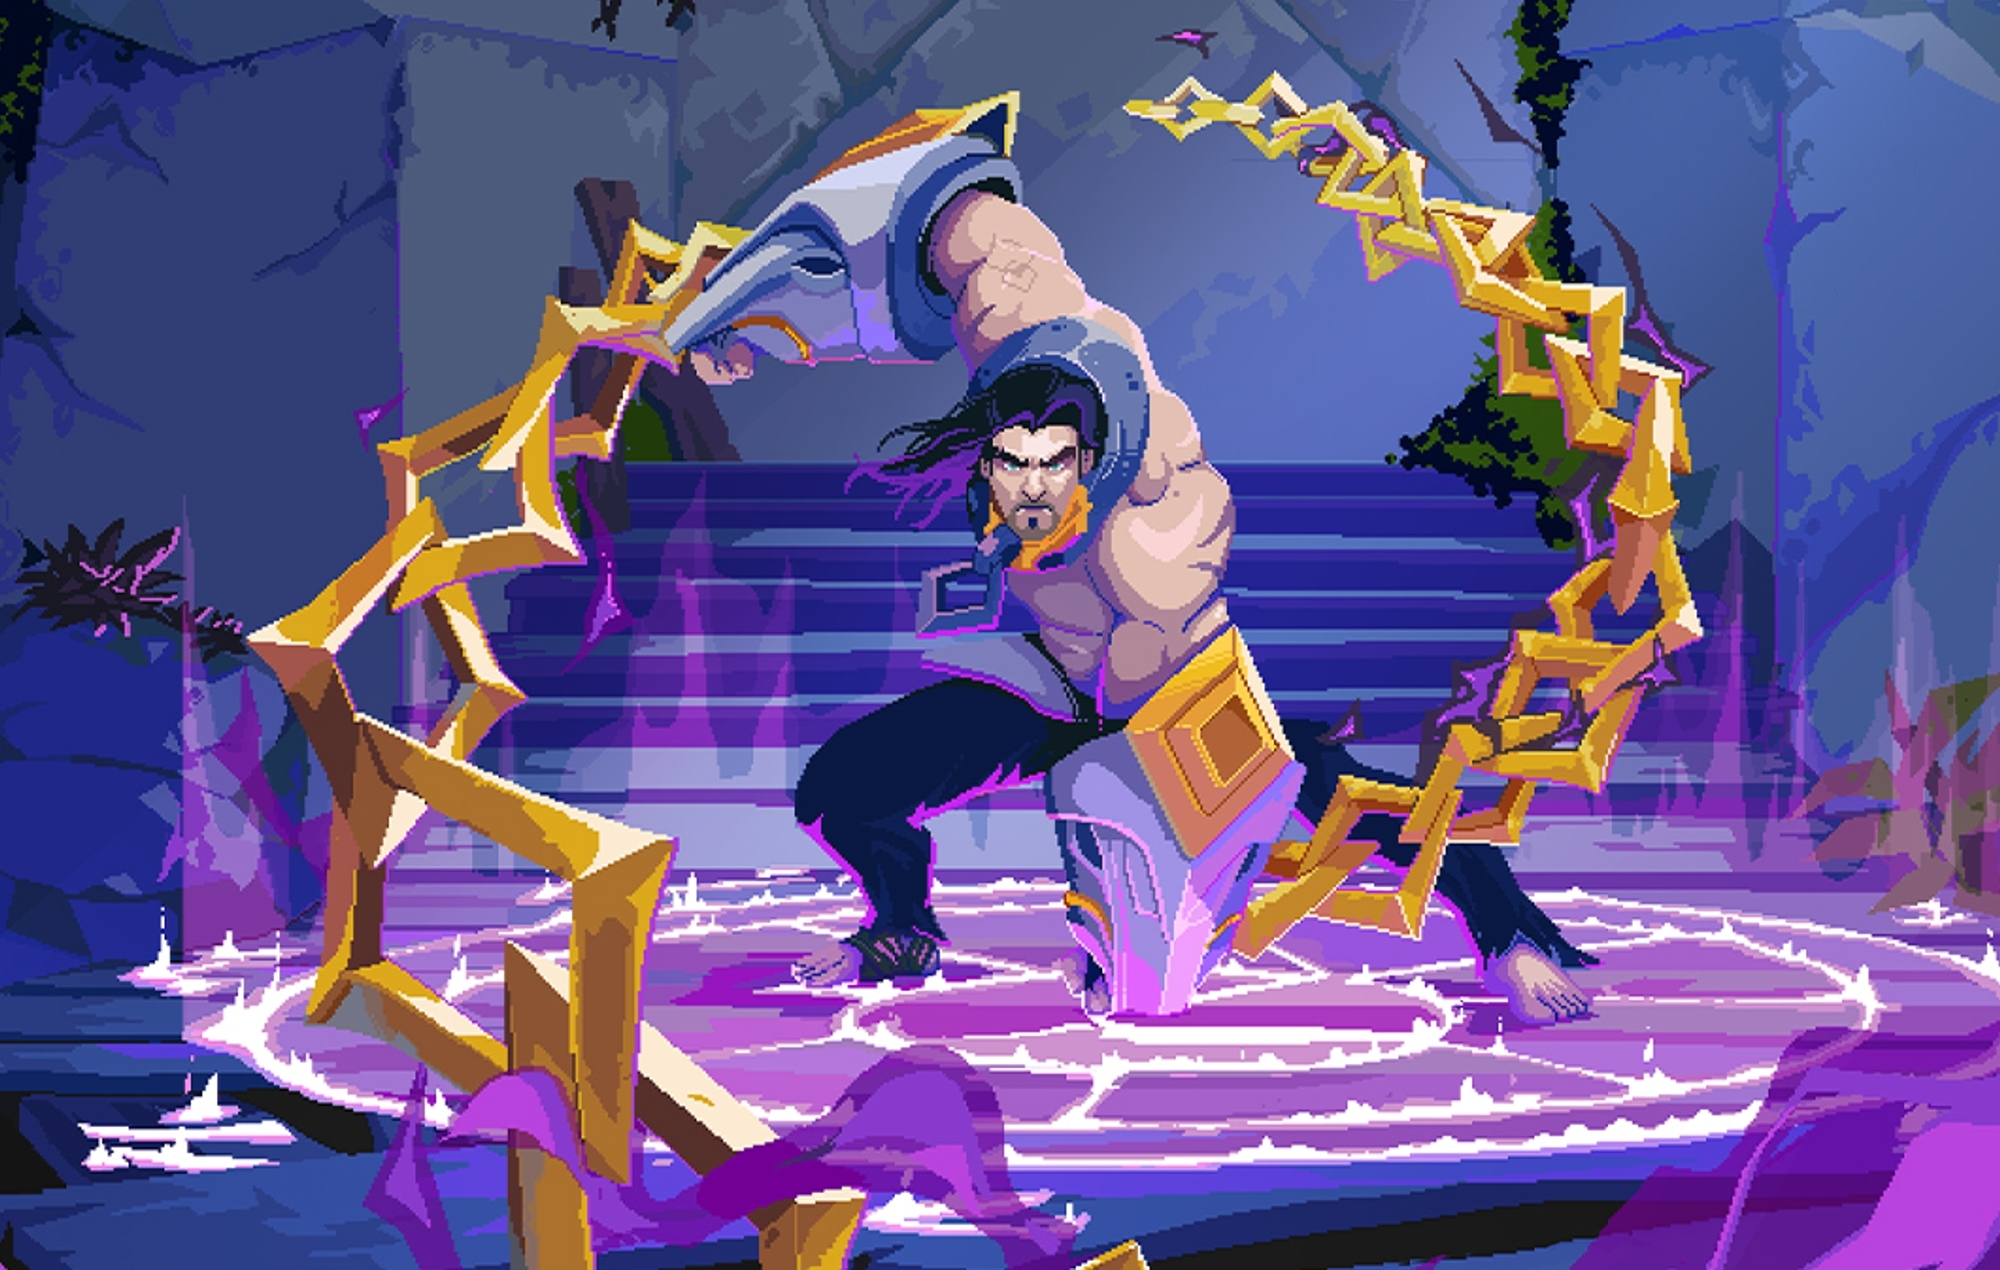 Sylas braces himself in key art for The Mageseeker - A League of Legends Story